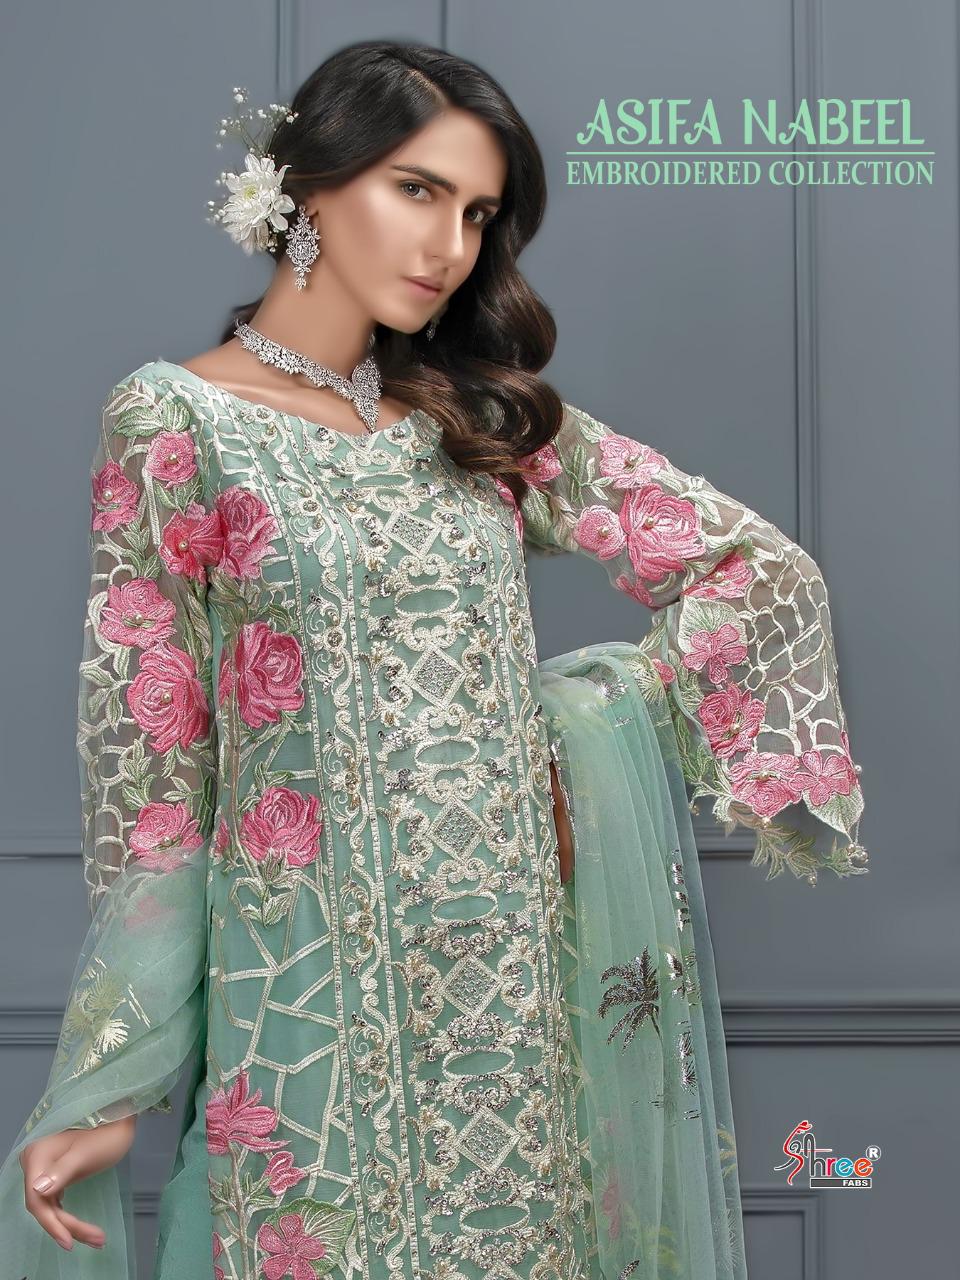 Shree Fabs Asifa Nabeel Embroidered Collection Pakistani Dress online seller